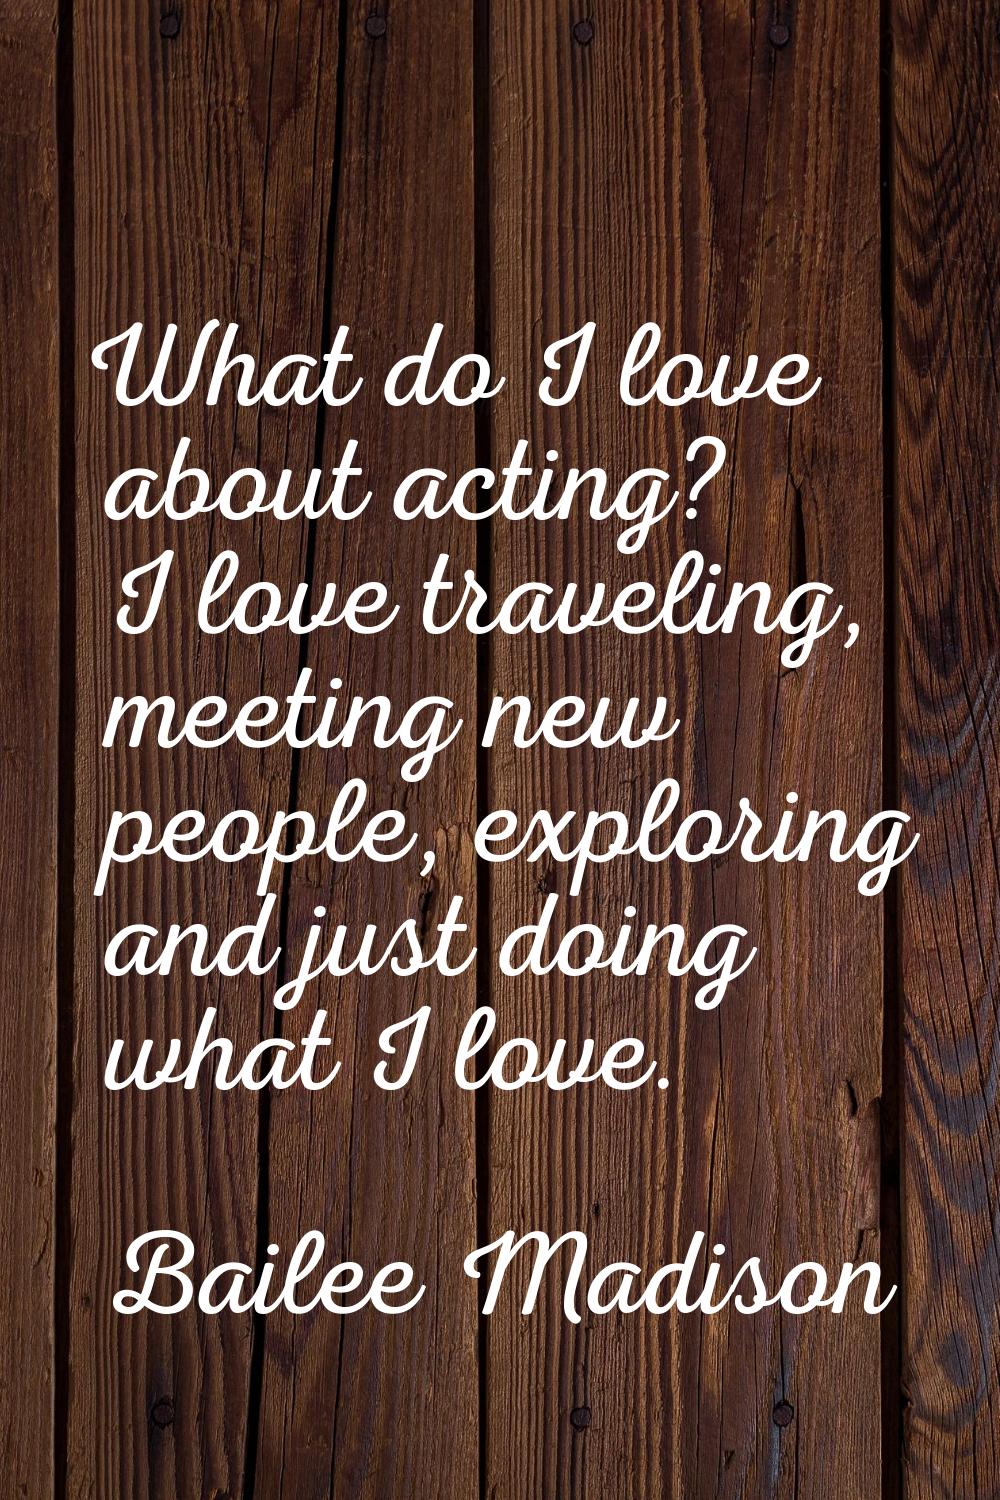 What do I love about acting? I love traveling, meeting new people, exploring and just doing what I 